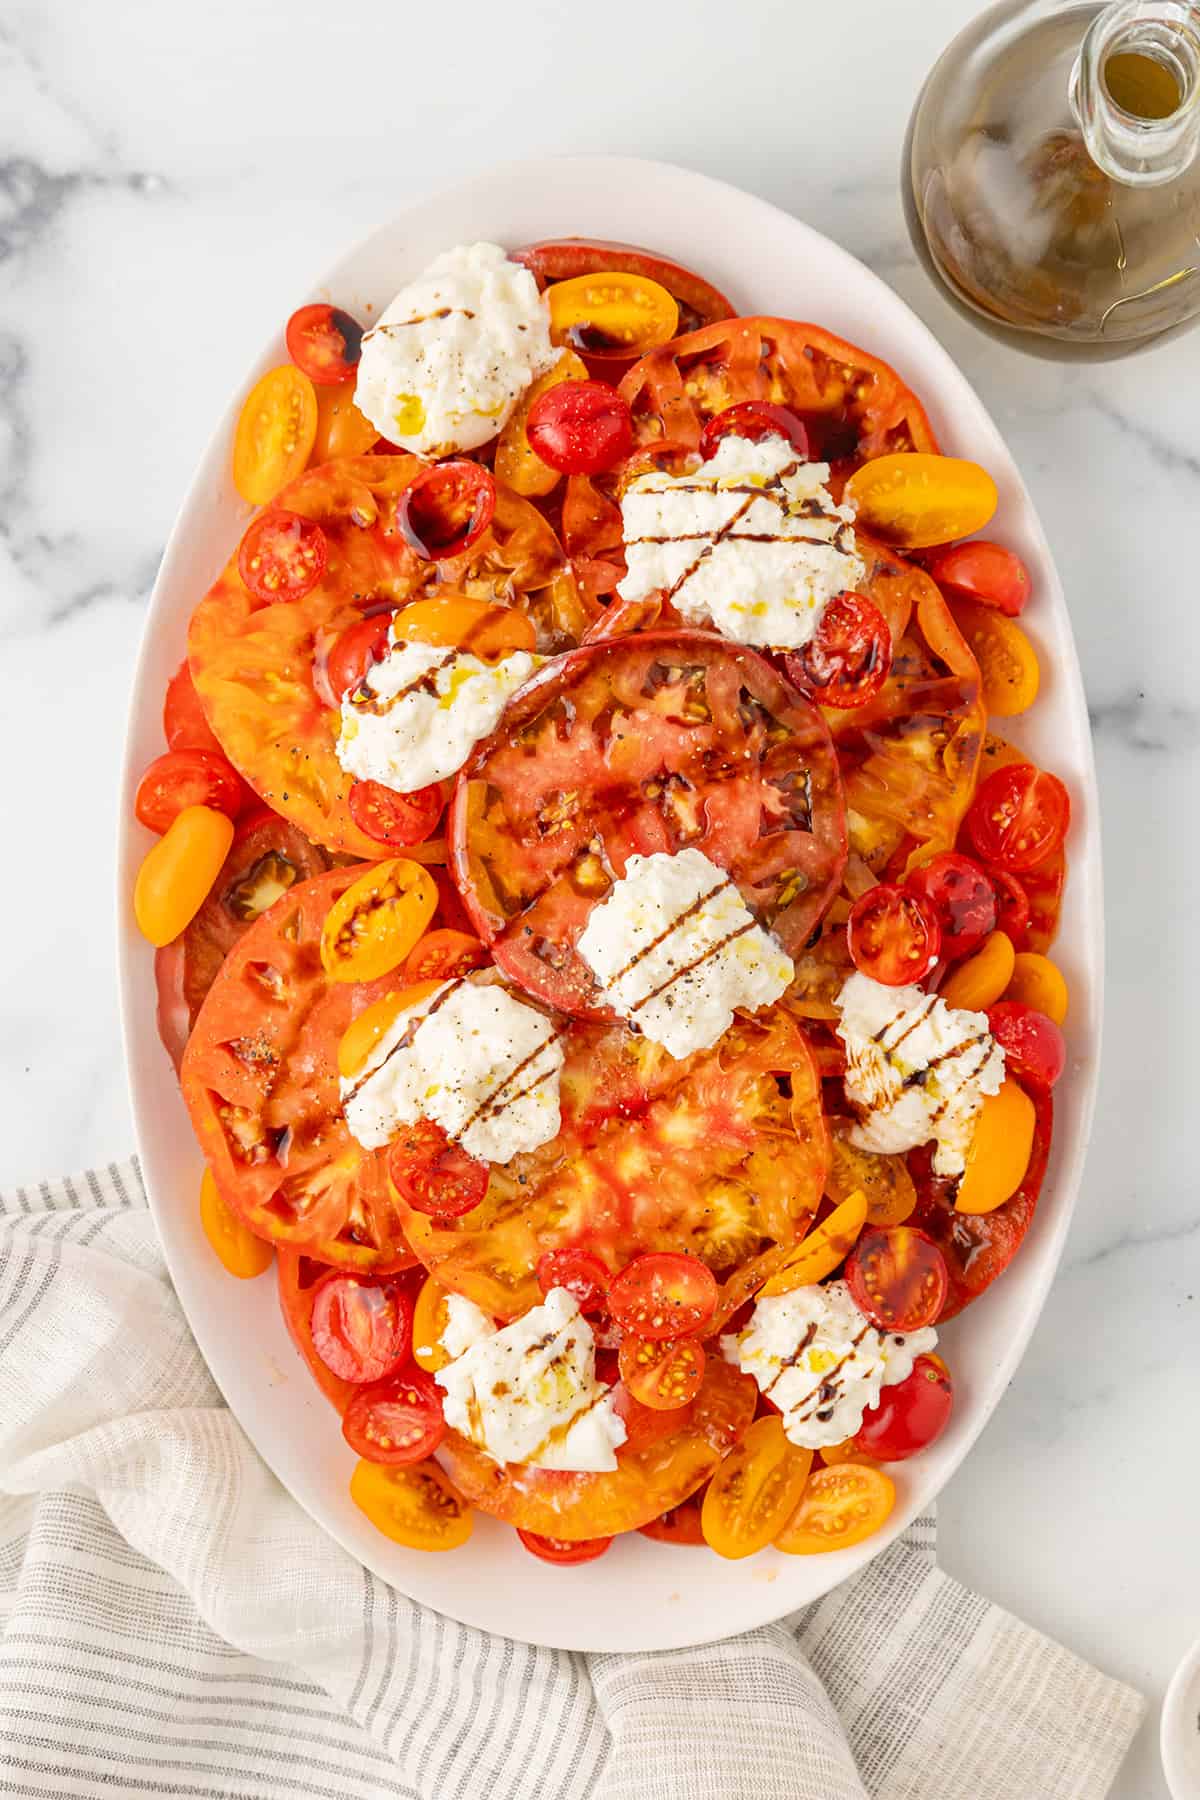 A large white serving platter with several sliced heirloom tomatoes, several sliced red and orange cherry tomatoes, and several pieces of torn burrata cheese drizzled with balsamic glaze and olive oil on a white counter top.